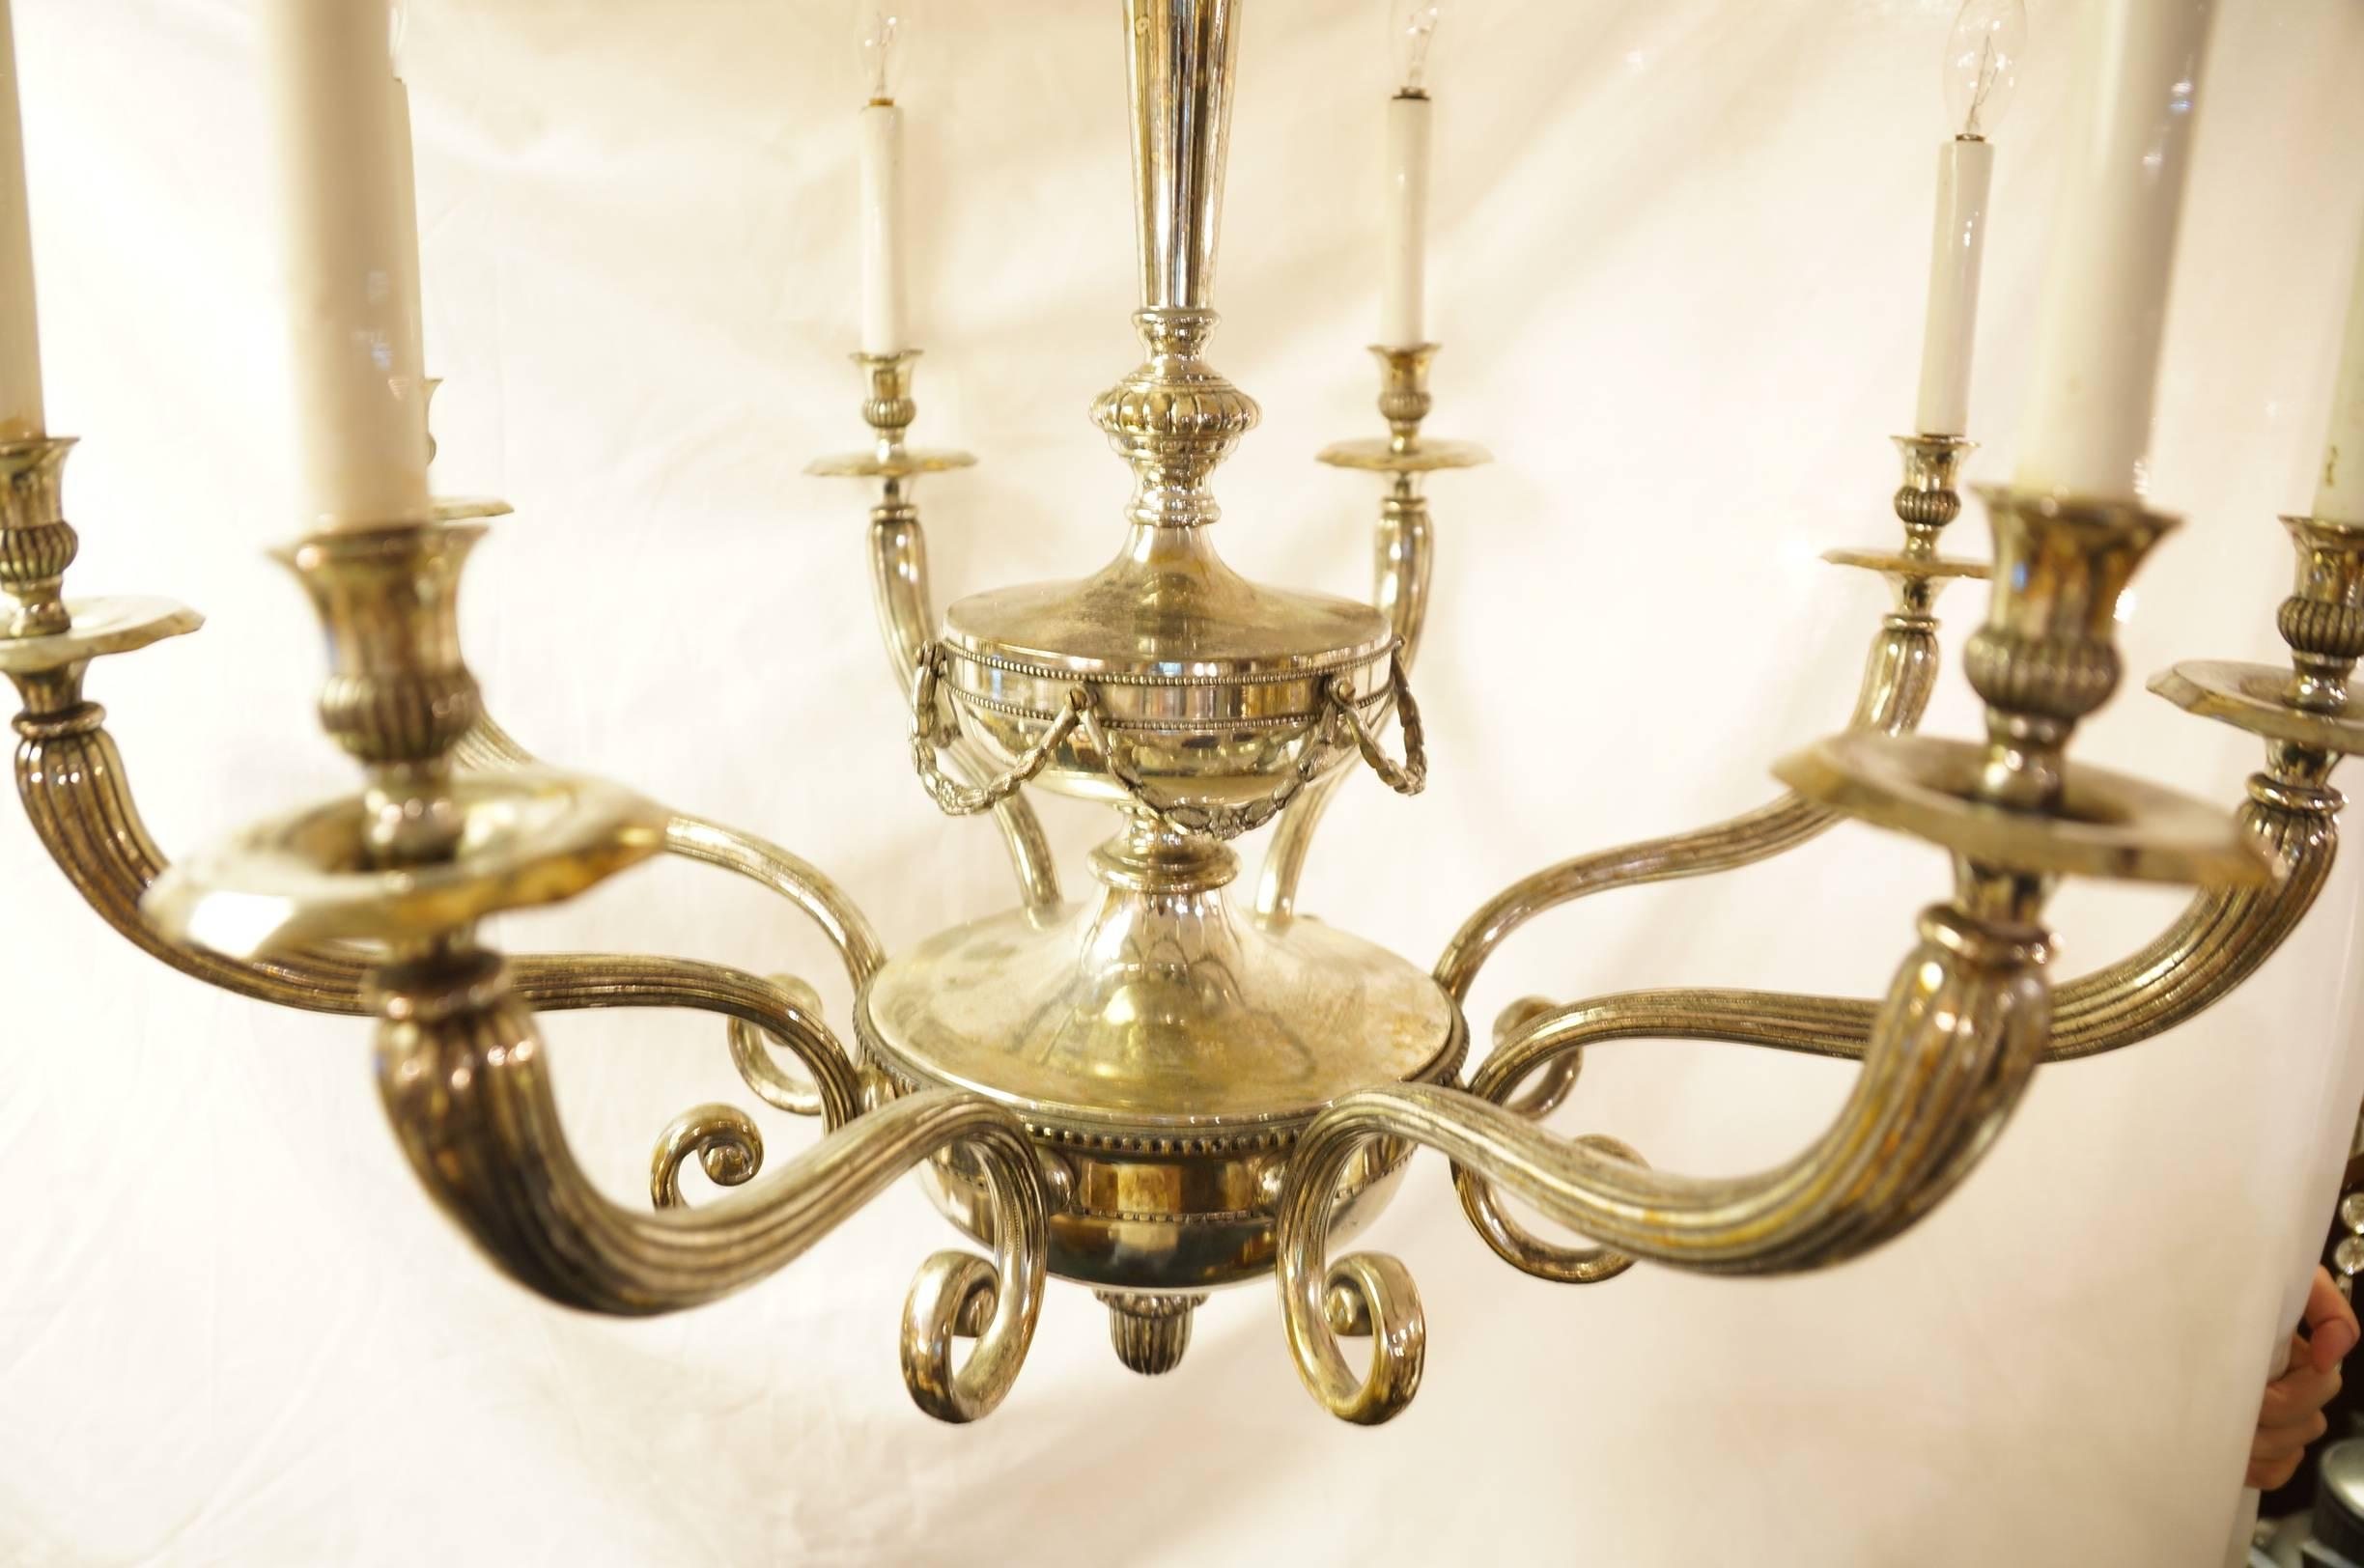 A Fine Neoclassical 8 Arm Silvered Chandelier Attributed to Caldwell and Co. 
Stock Number: L373